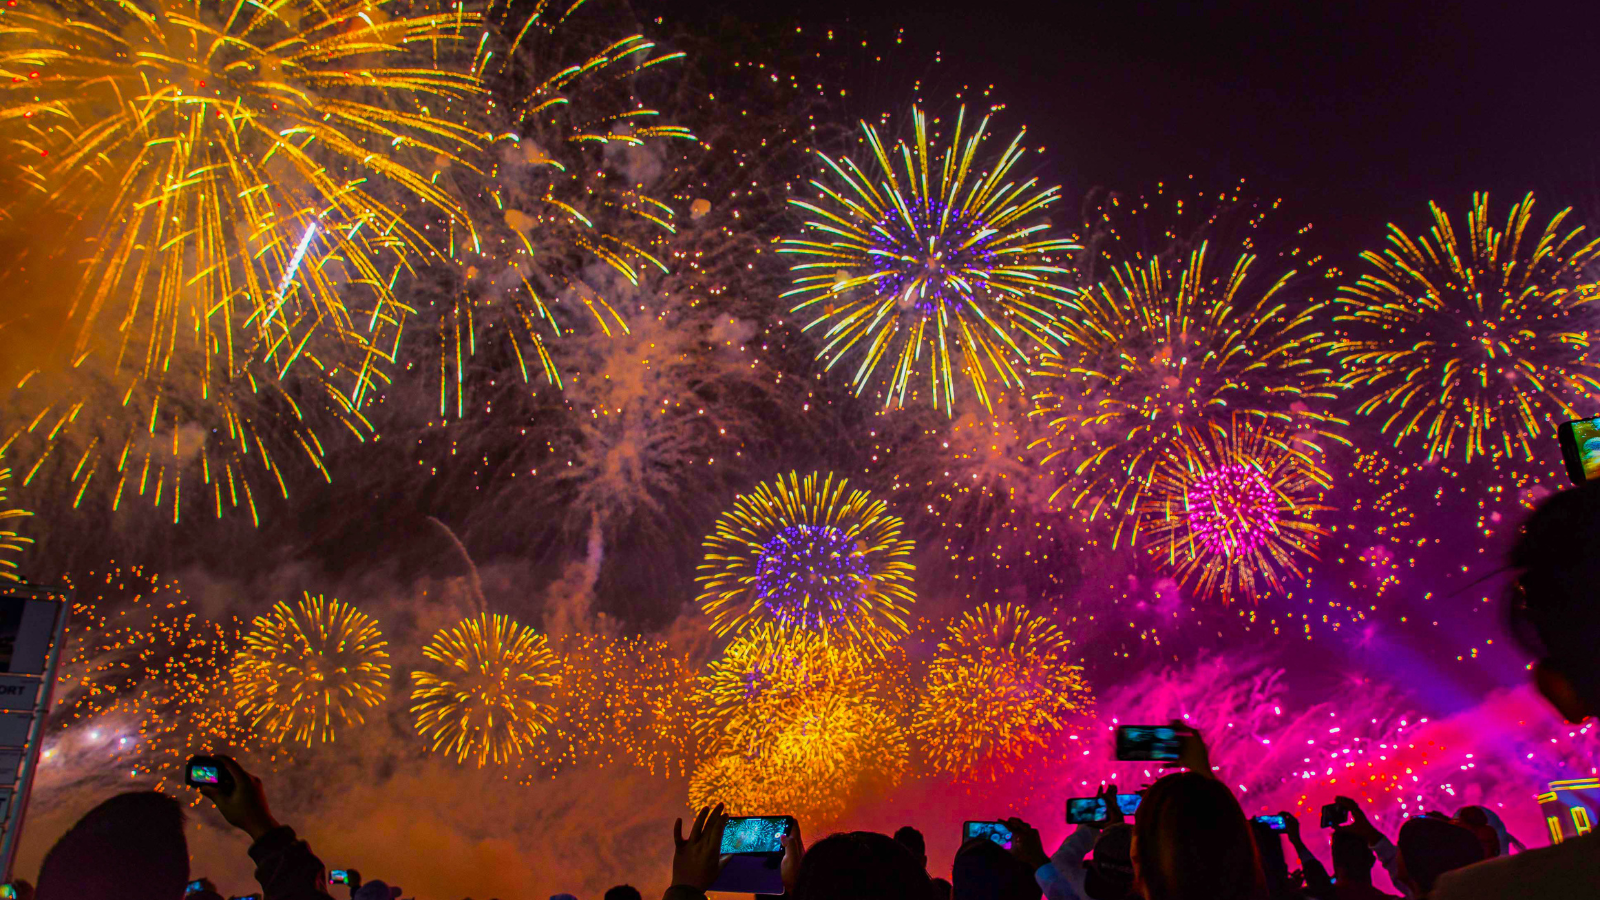 Colourful sky with fireworks lighting it up contrasts of orange yellow pink and purple